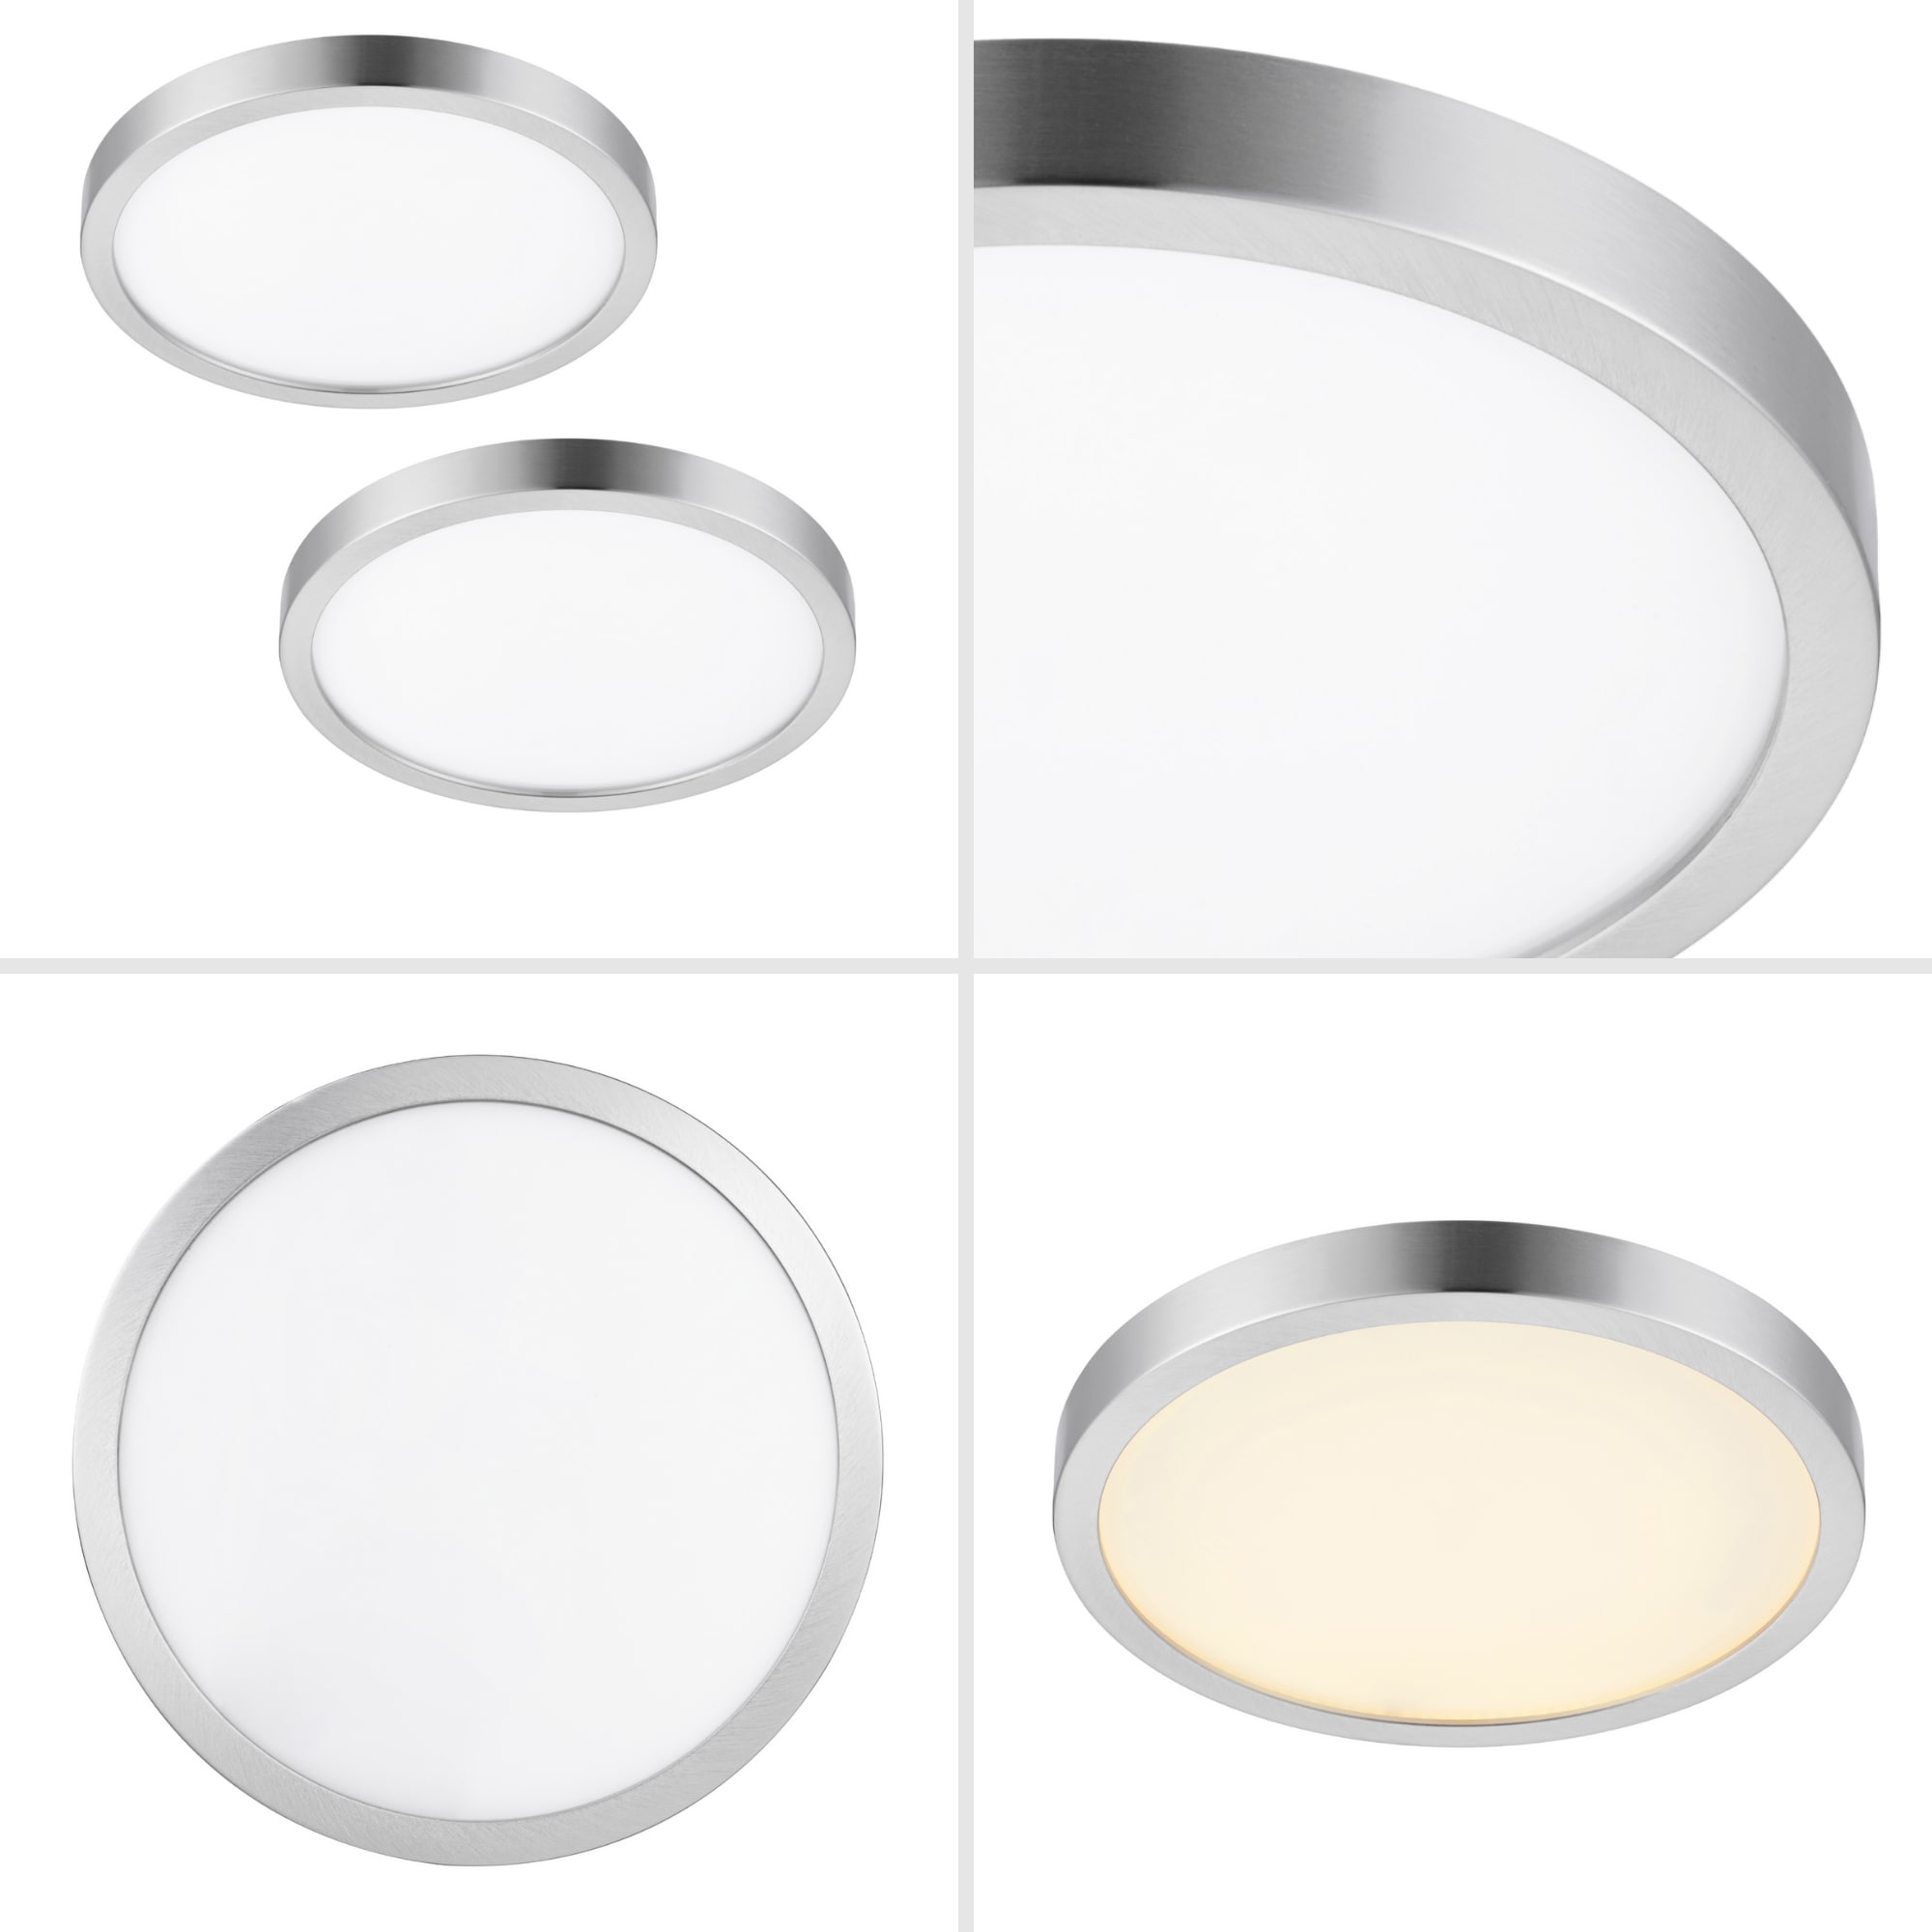 STAR 1-Light Nickel Mount in Lighting at Brushed Project (2-Pack) Mount the ENERGY Source Flush LED Flush 12-in Light department